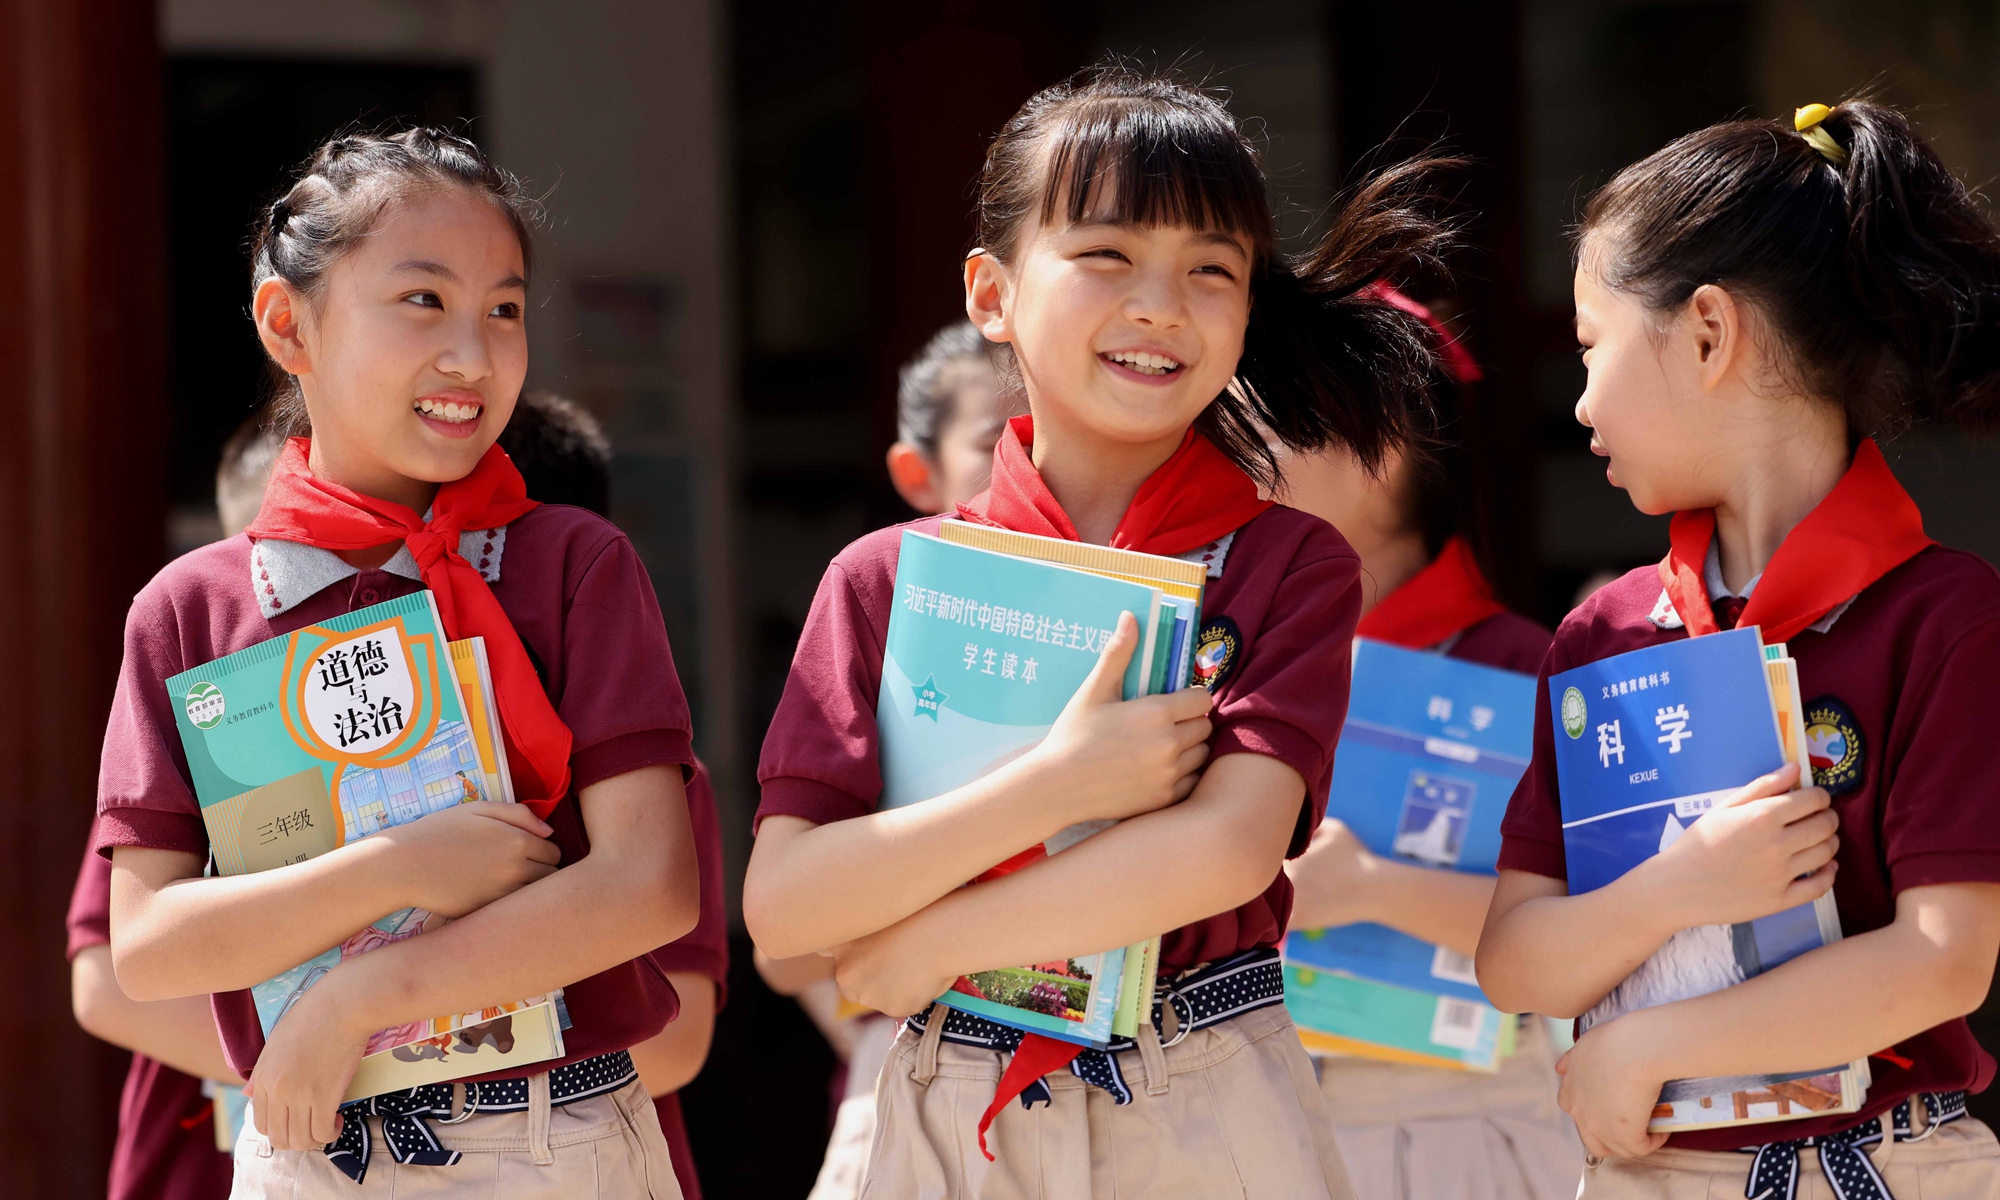 Students run around the Heping Primary School in Yaohai district of Hefei, East China's Anhui Province on Monday, holding new textbooks they have just received. Schools in China will begin the new semester on Wednesday. Photo: IC